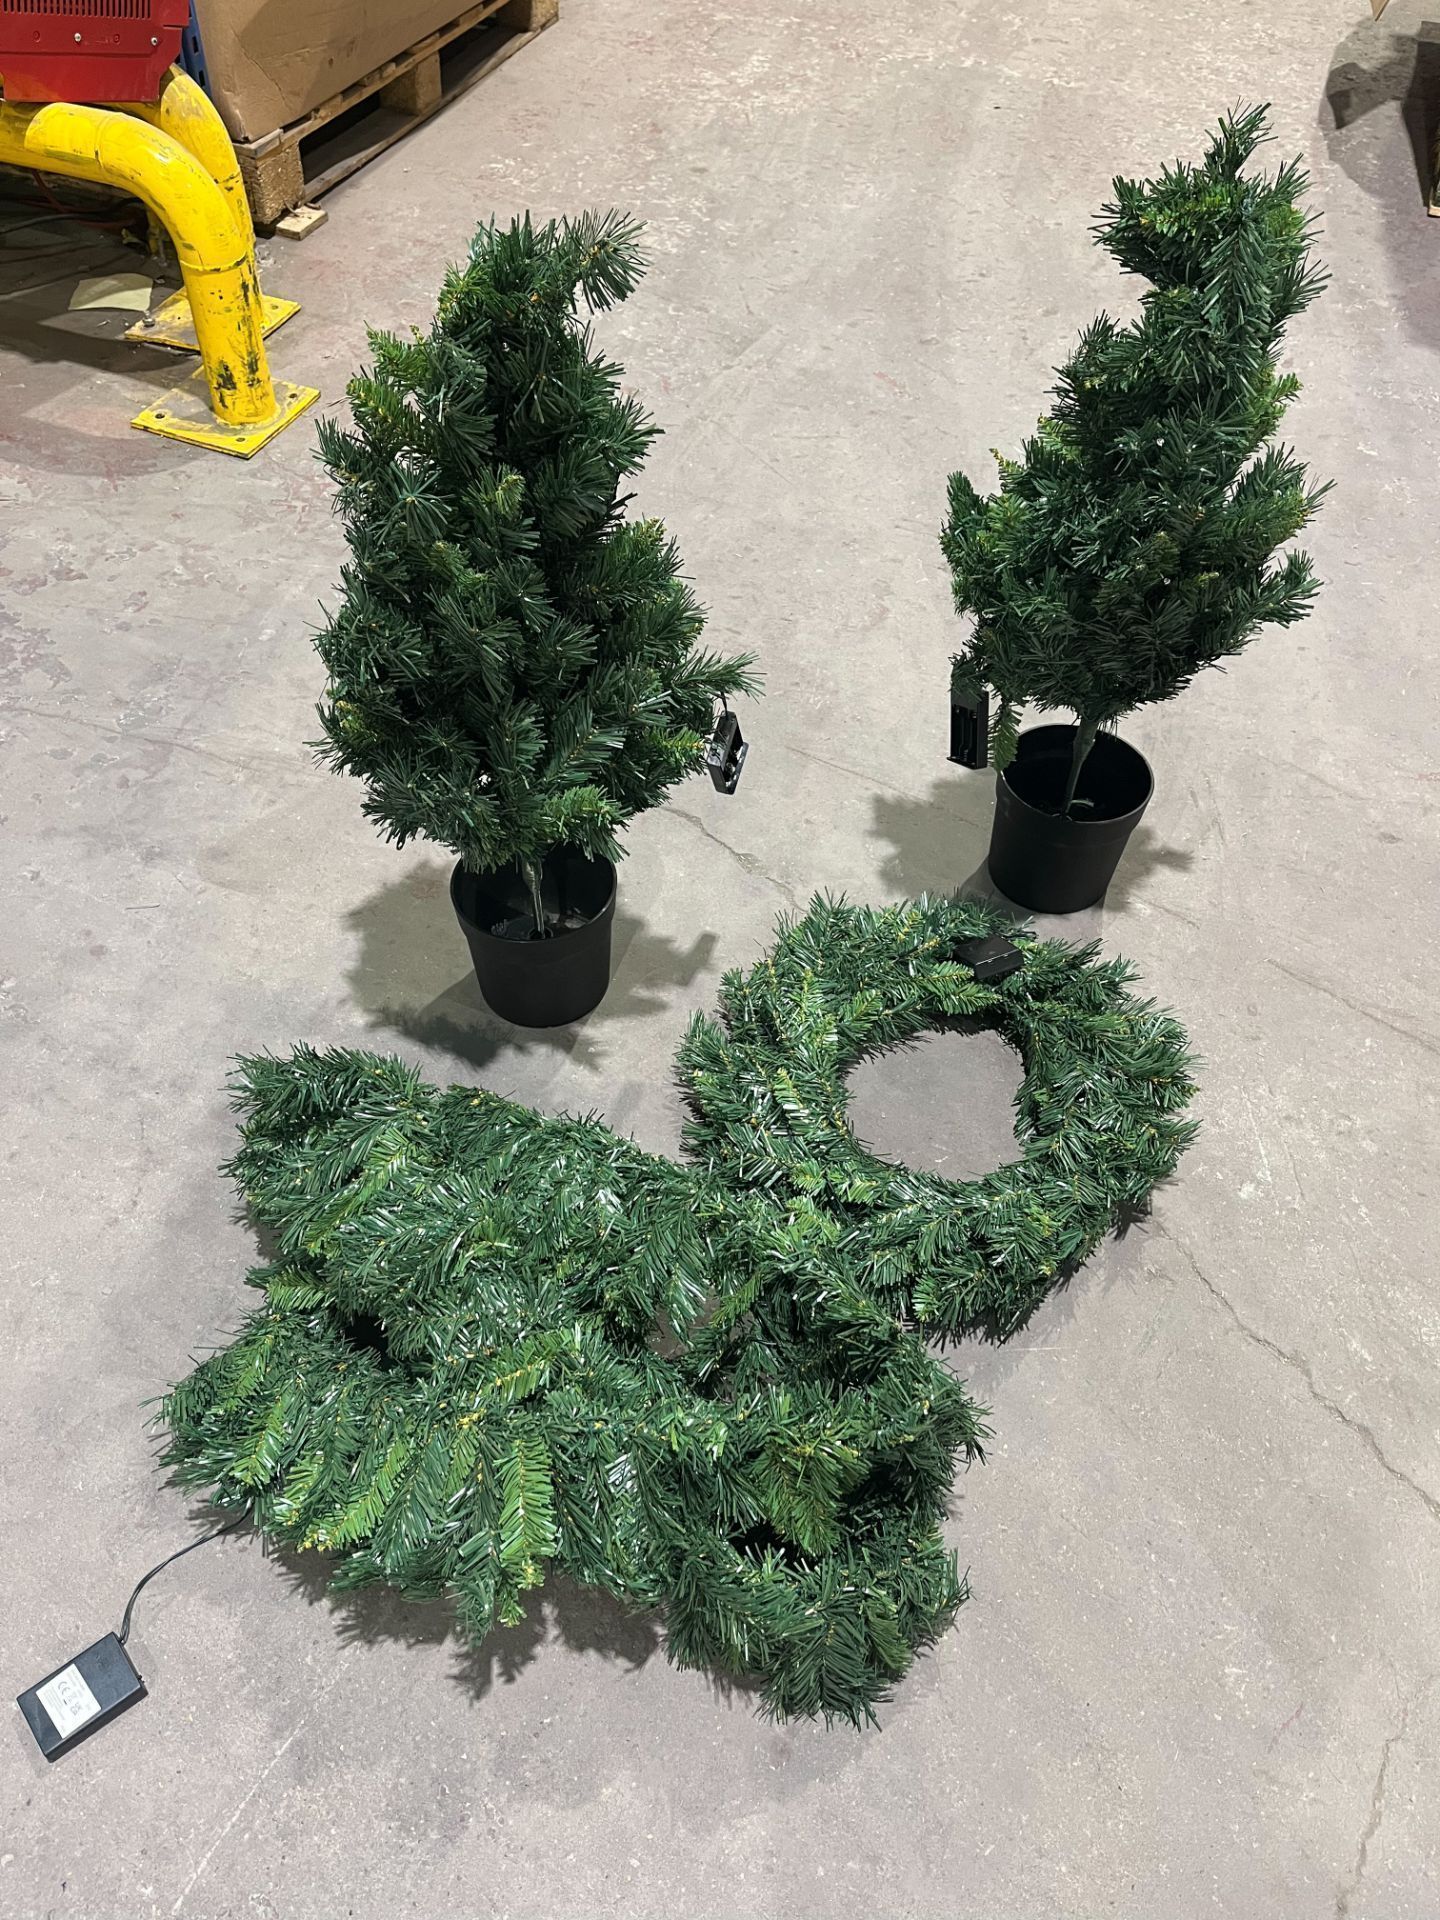 BRAND NEW CHRISTMAS DOOR LED LIGHTS SETS INCLDUNG 2 X POTTED TREES AND 2 BRANCH CONNECTORS RRP £ - Image 2 of 2